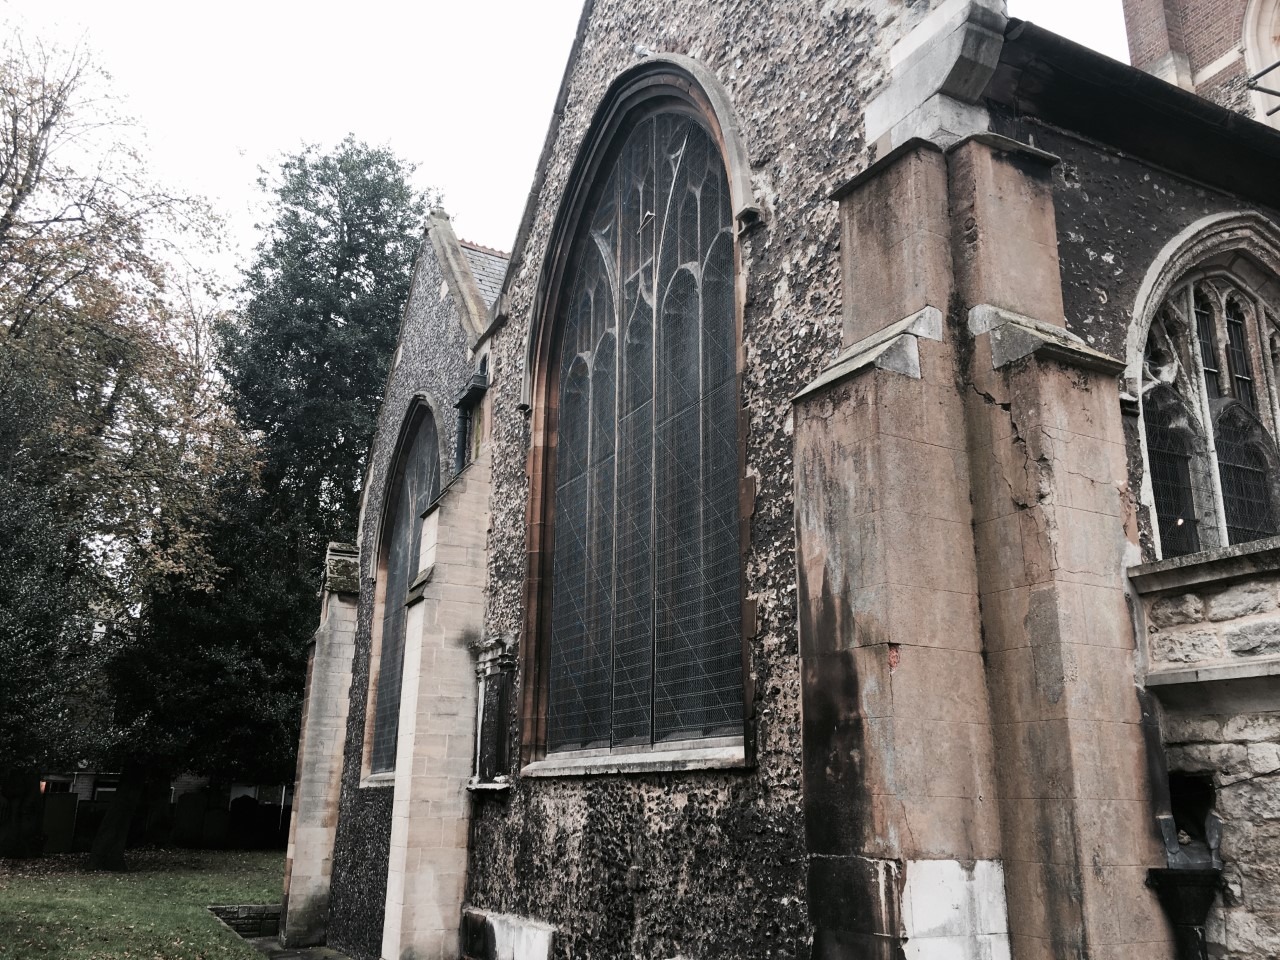 Kingston residents uncover skeletons around All Saints Church